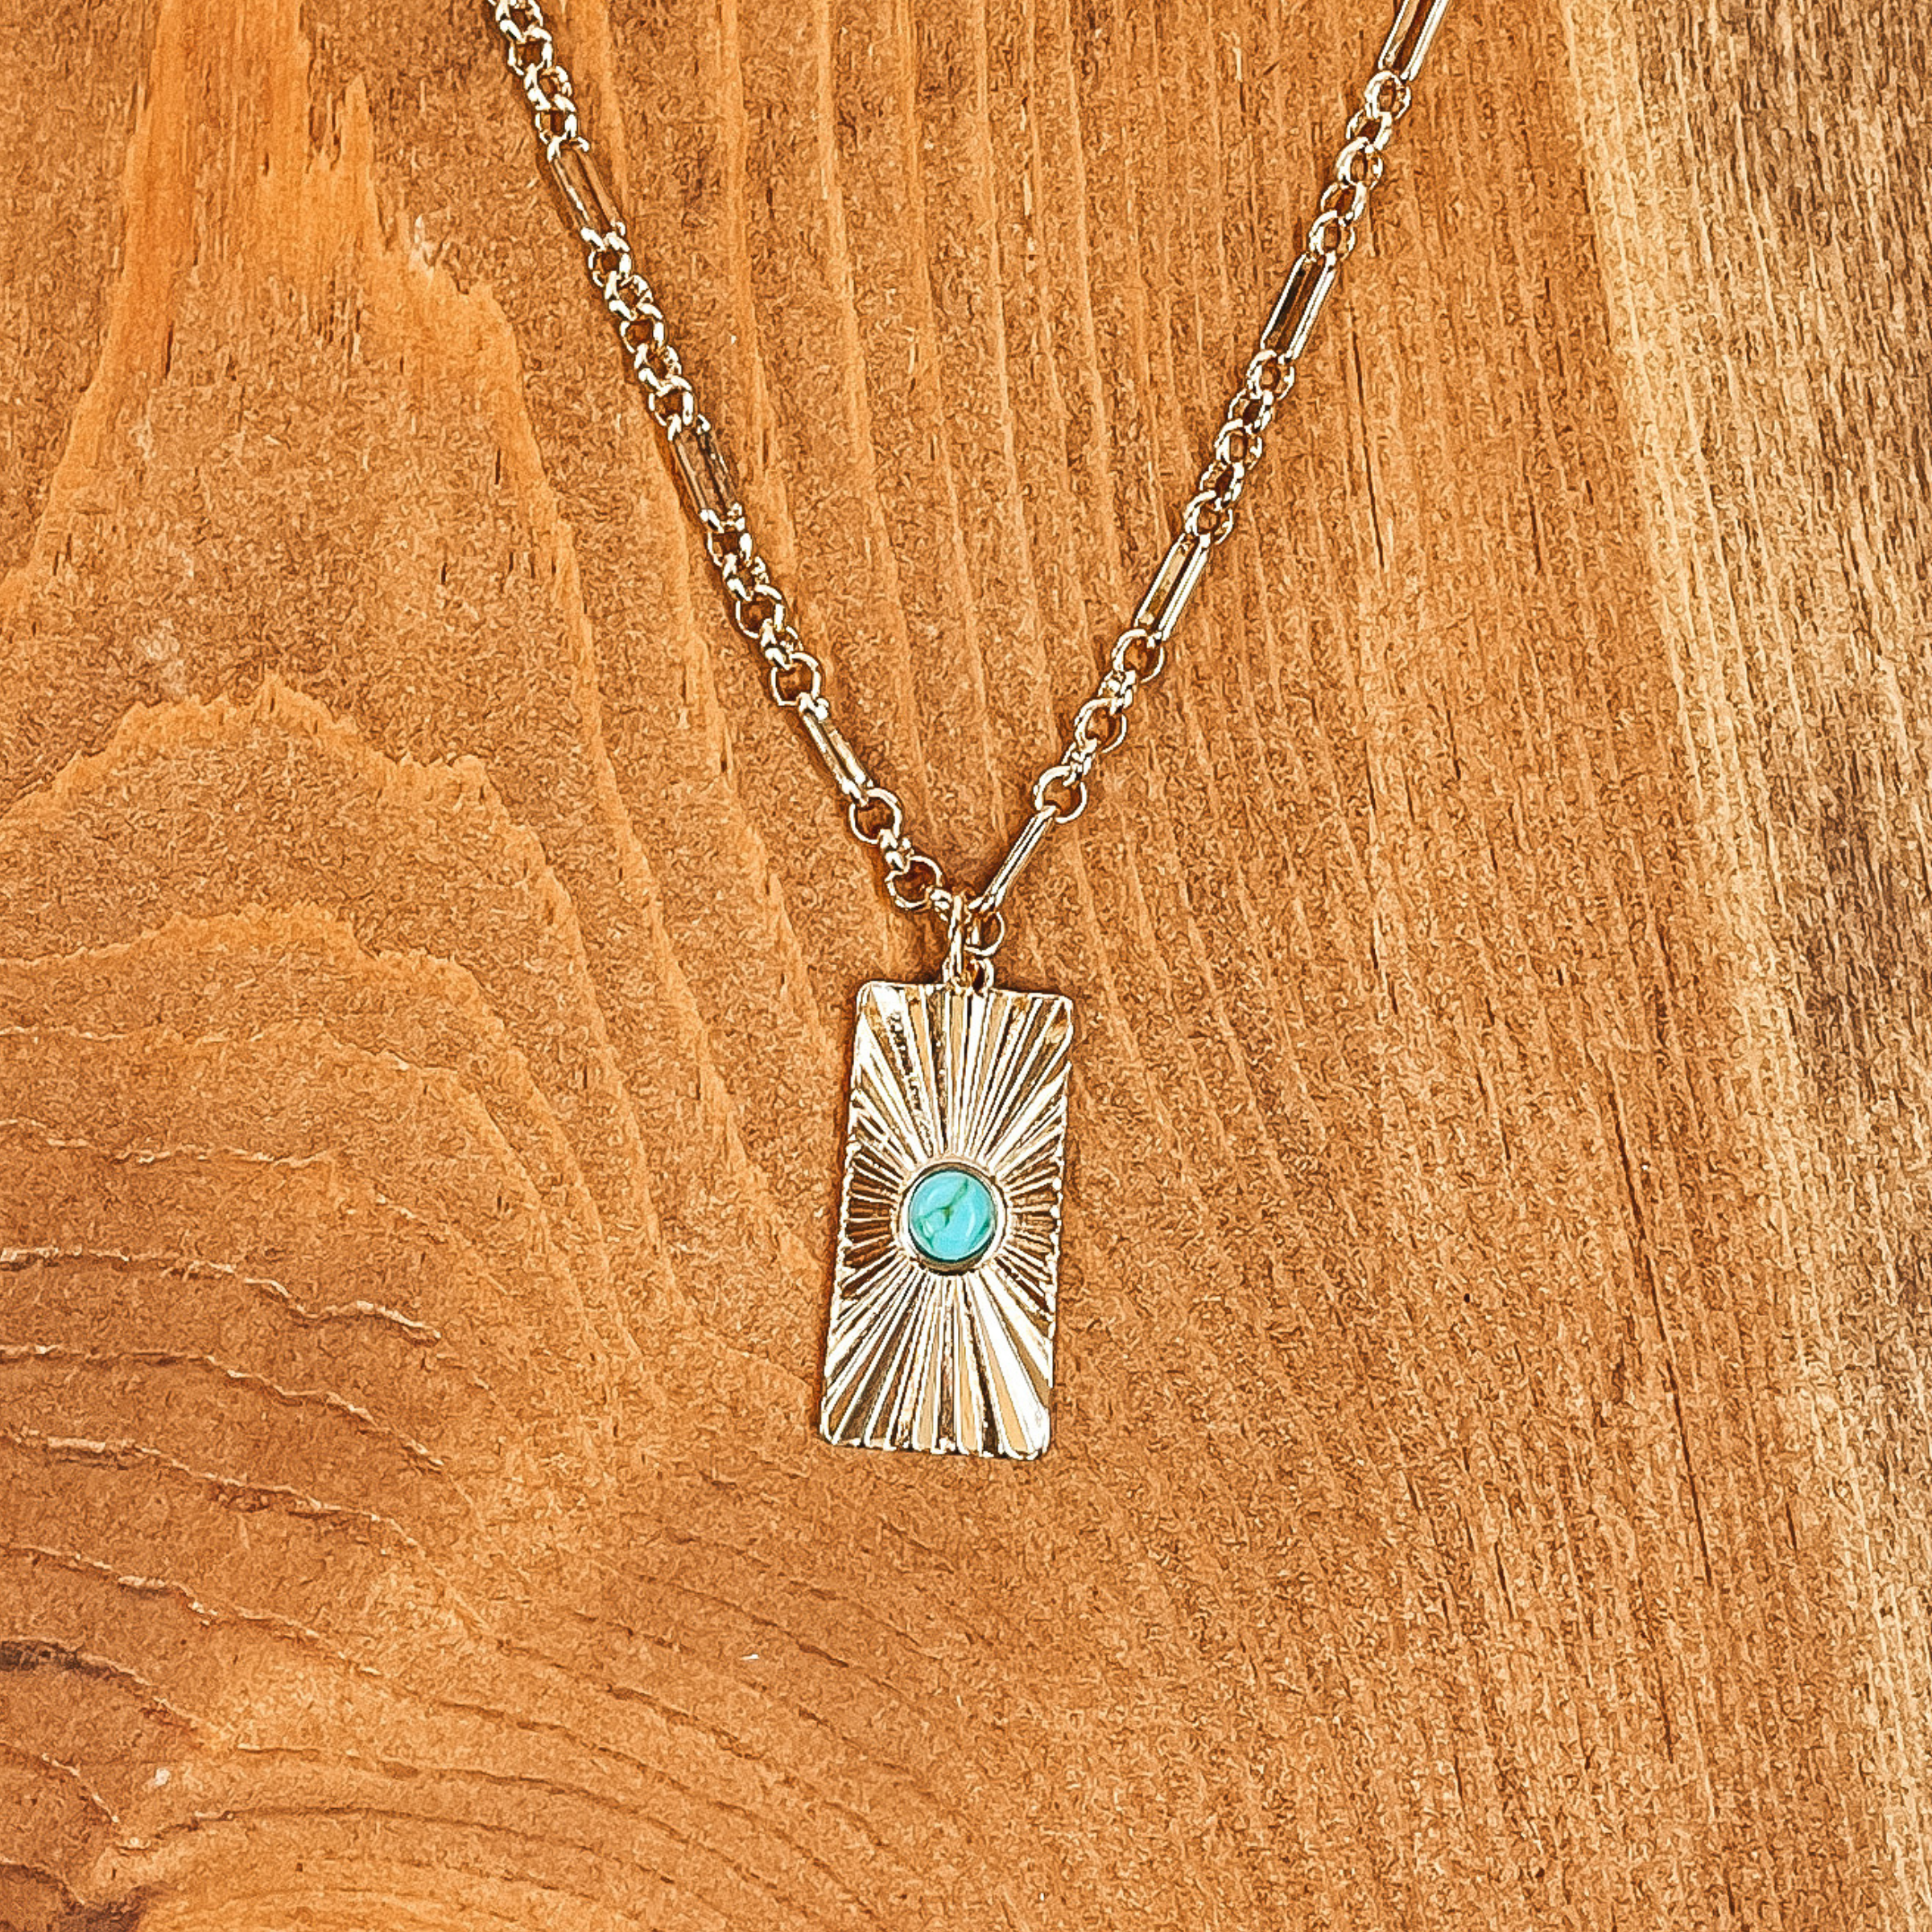 Convince Me Gold Necklace with Sunburst Rectangle Pendant and Small Stone in Turquoise - Giddy Up Glamour Boutique